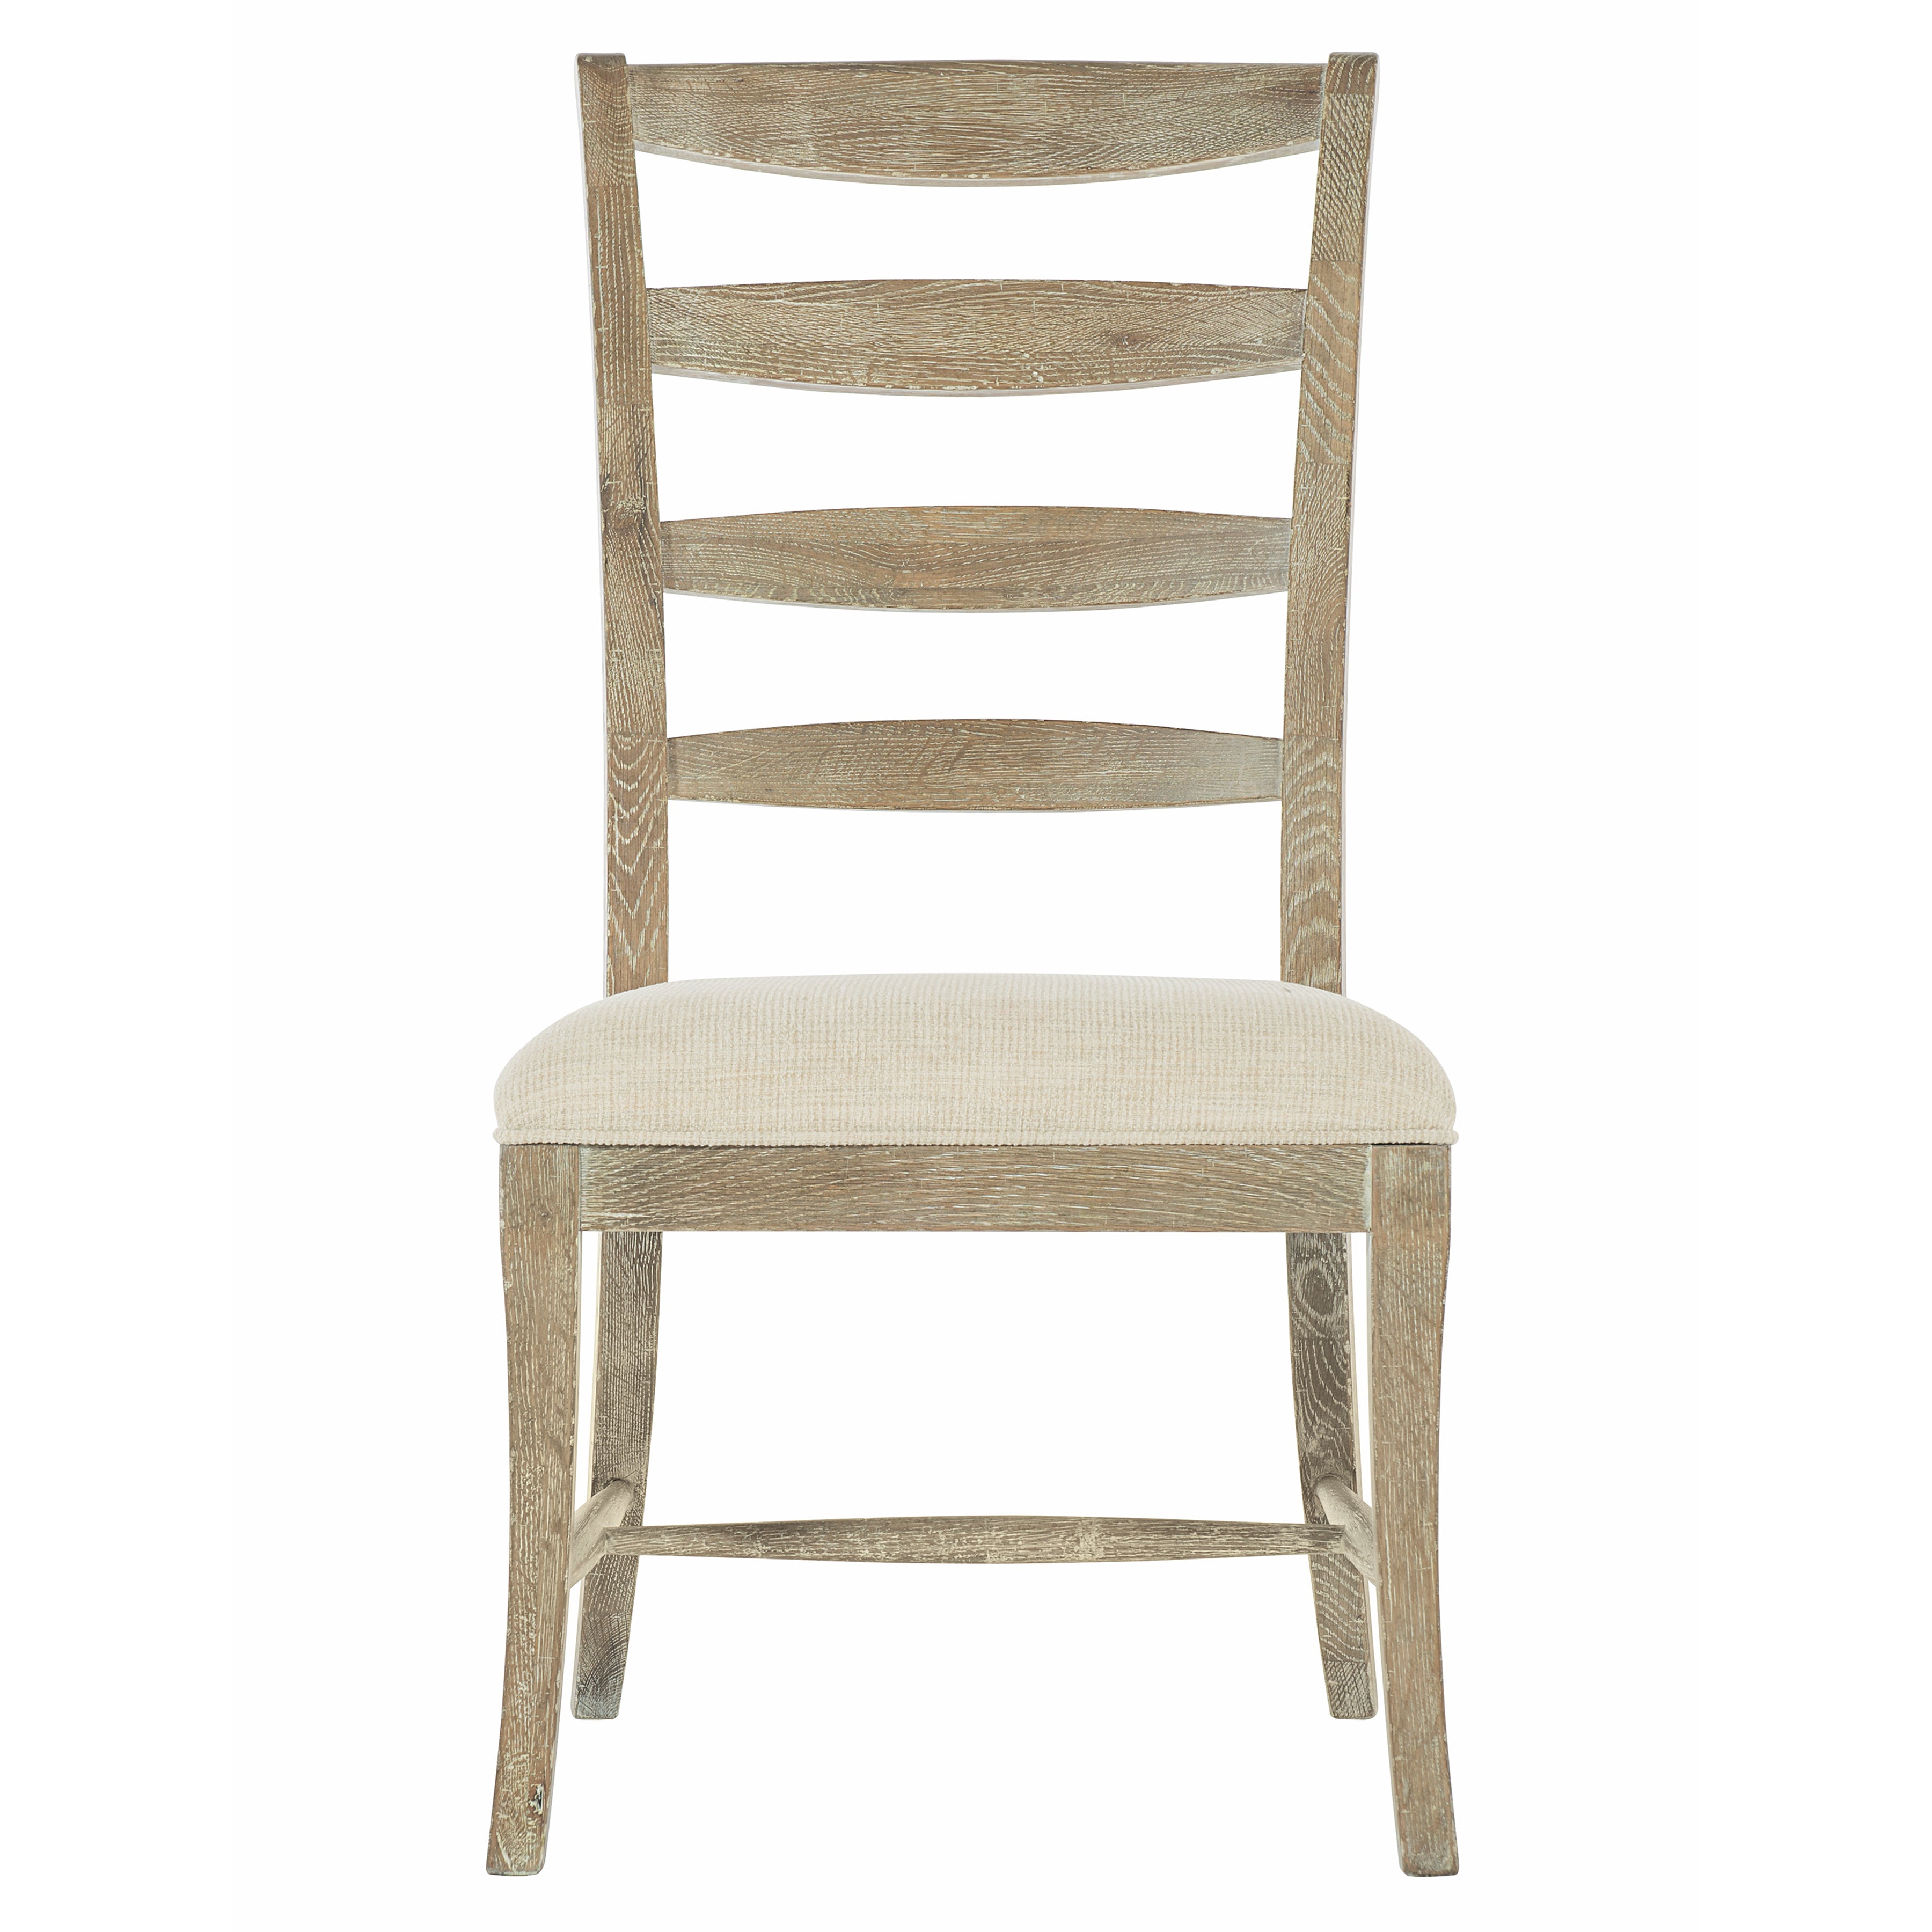 Rustic Patina Ladderback Side Chair in Sand Finish